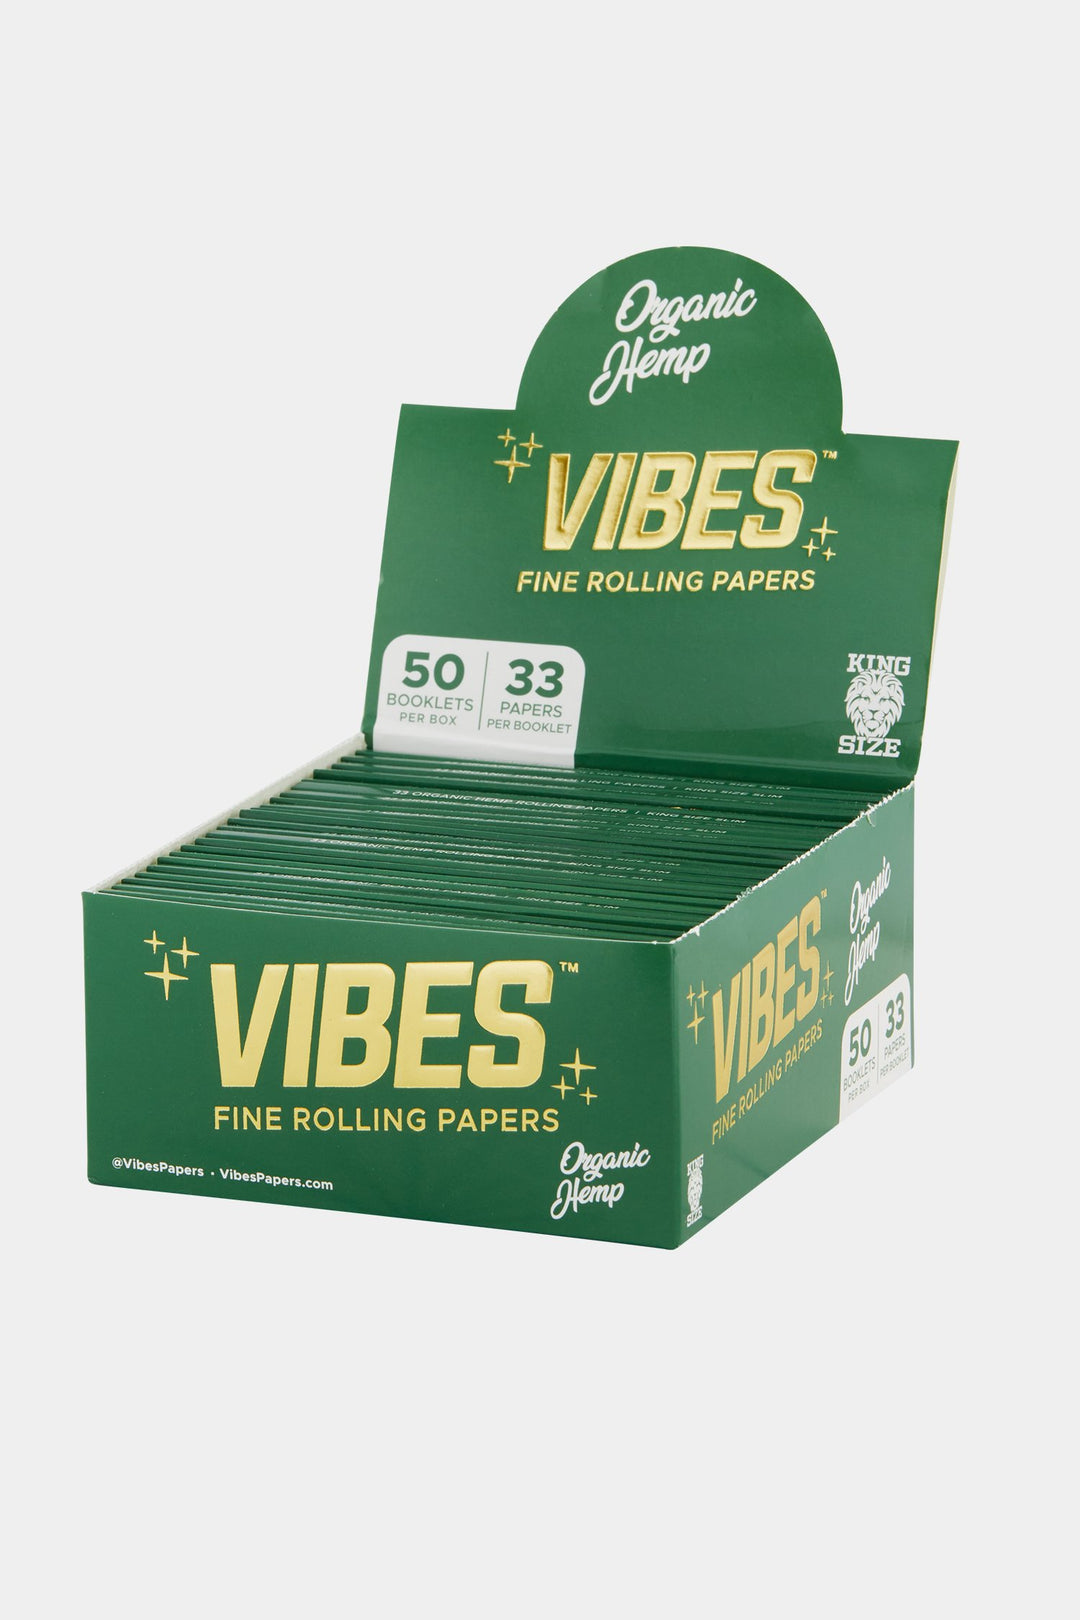 VIBES King Size Organic Hemp Rolling Papers